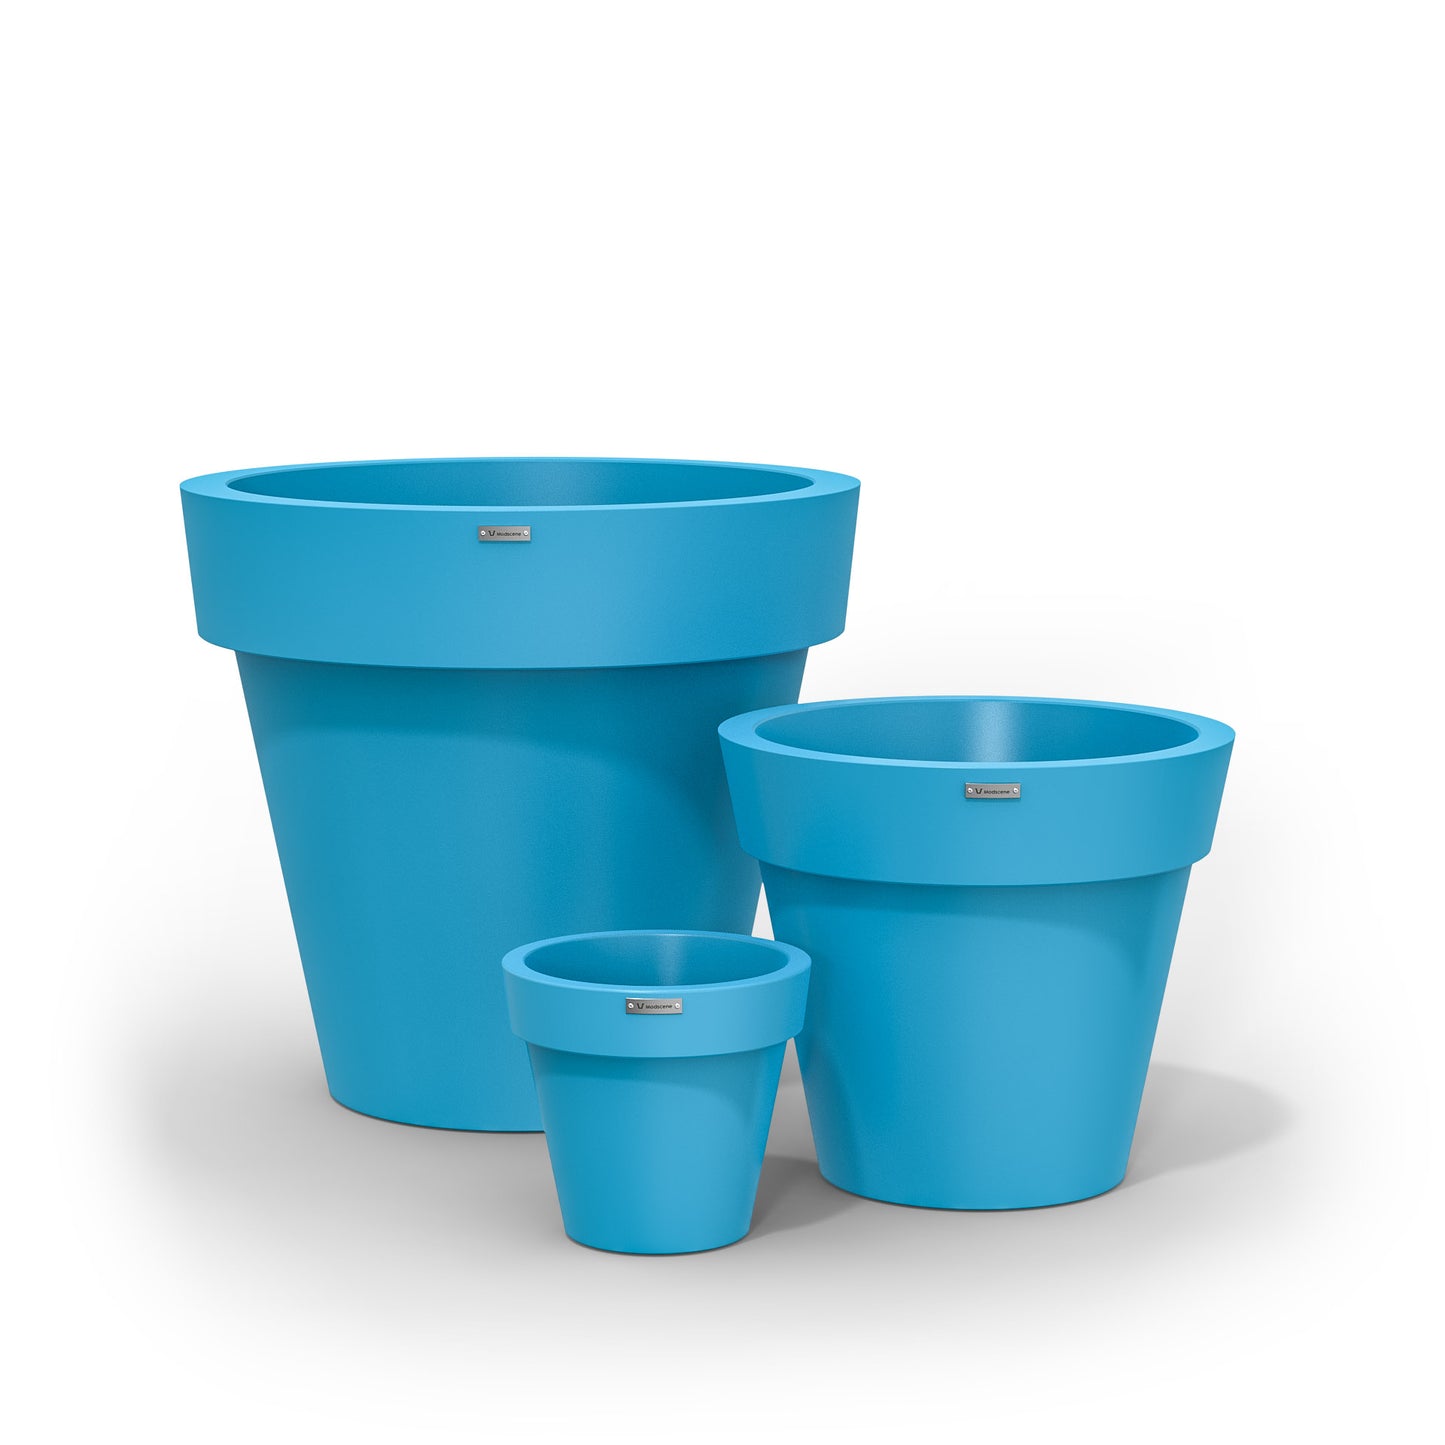 A cluster of three Modscene planters pots in a blue colour. Made in New Zealand.